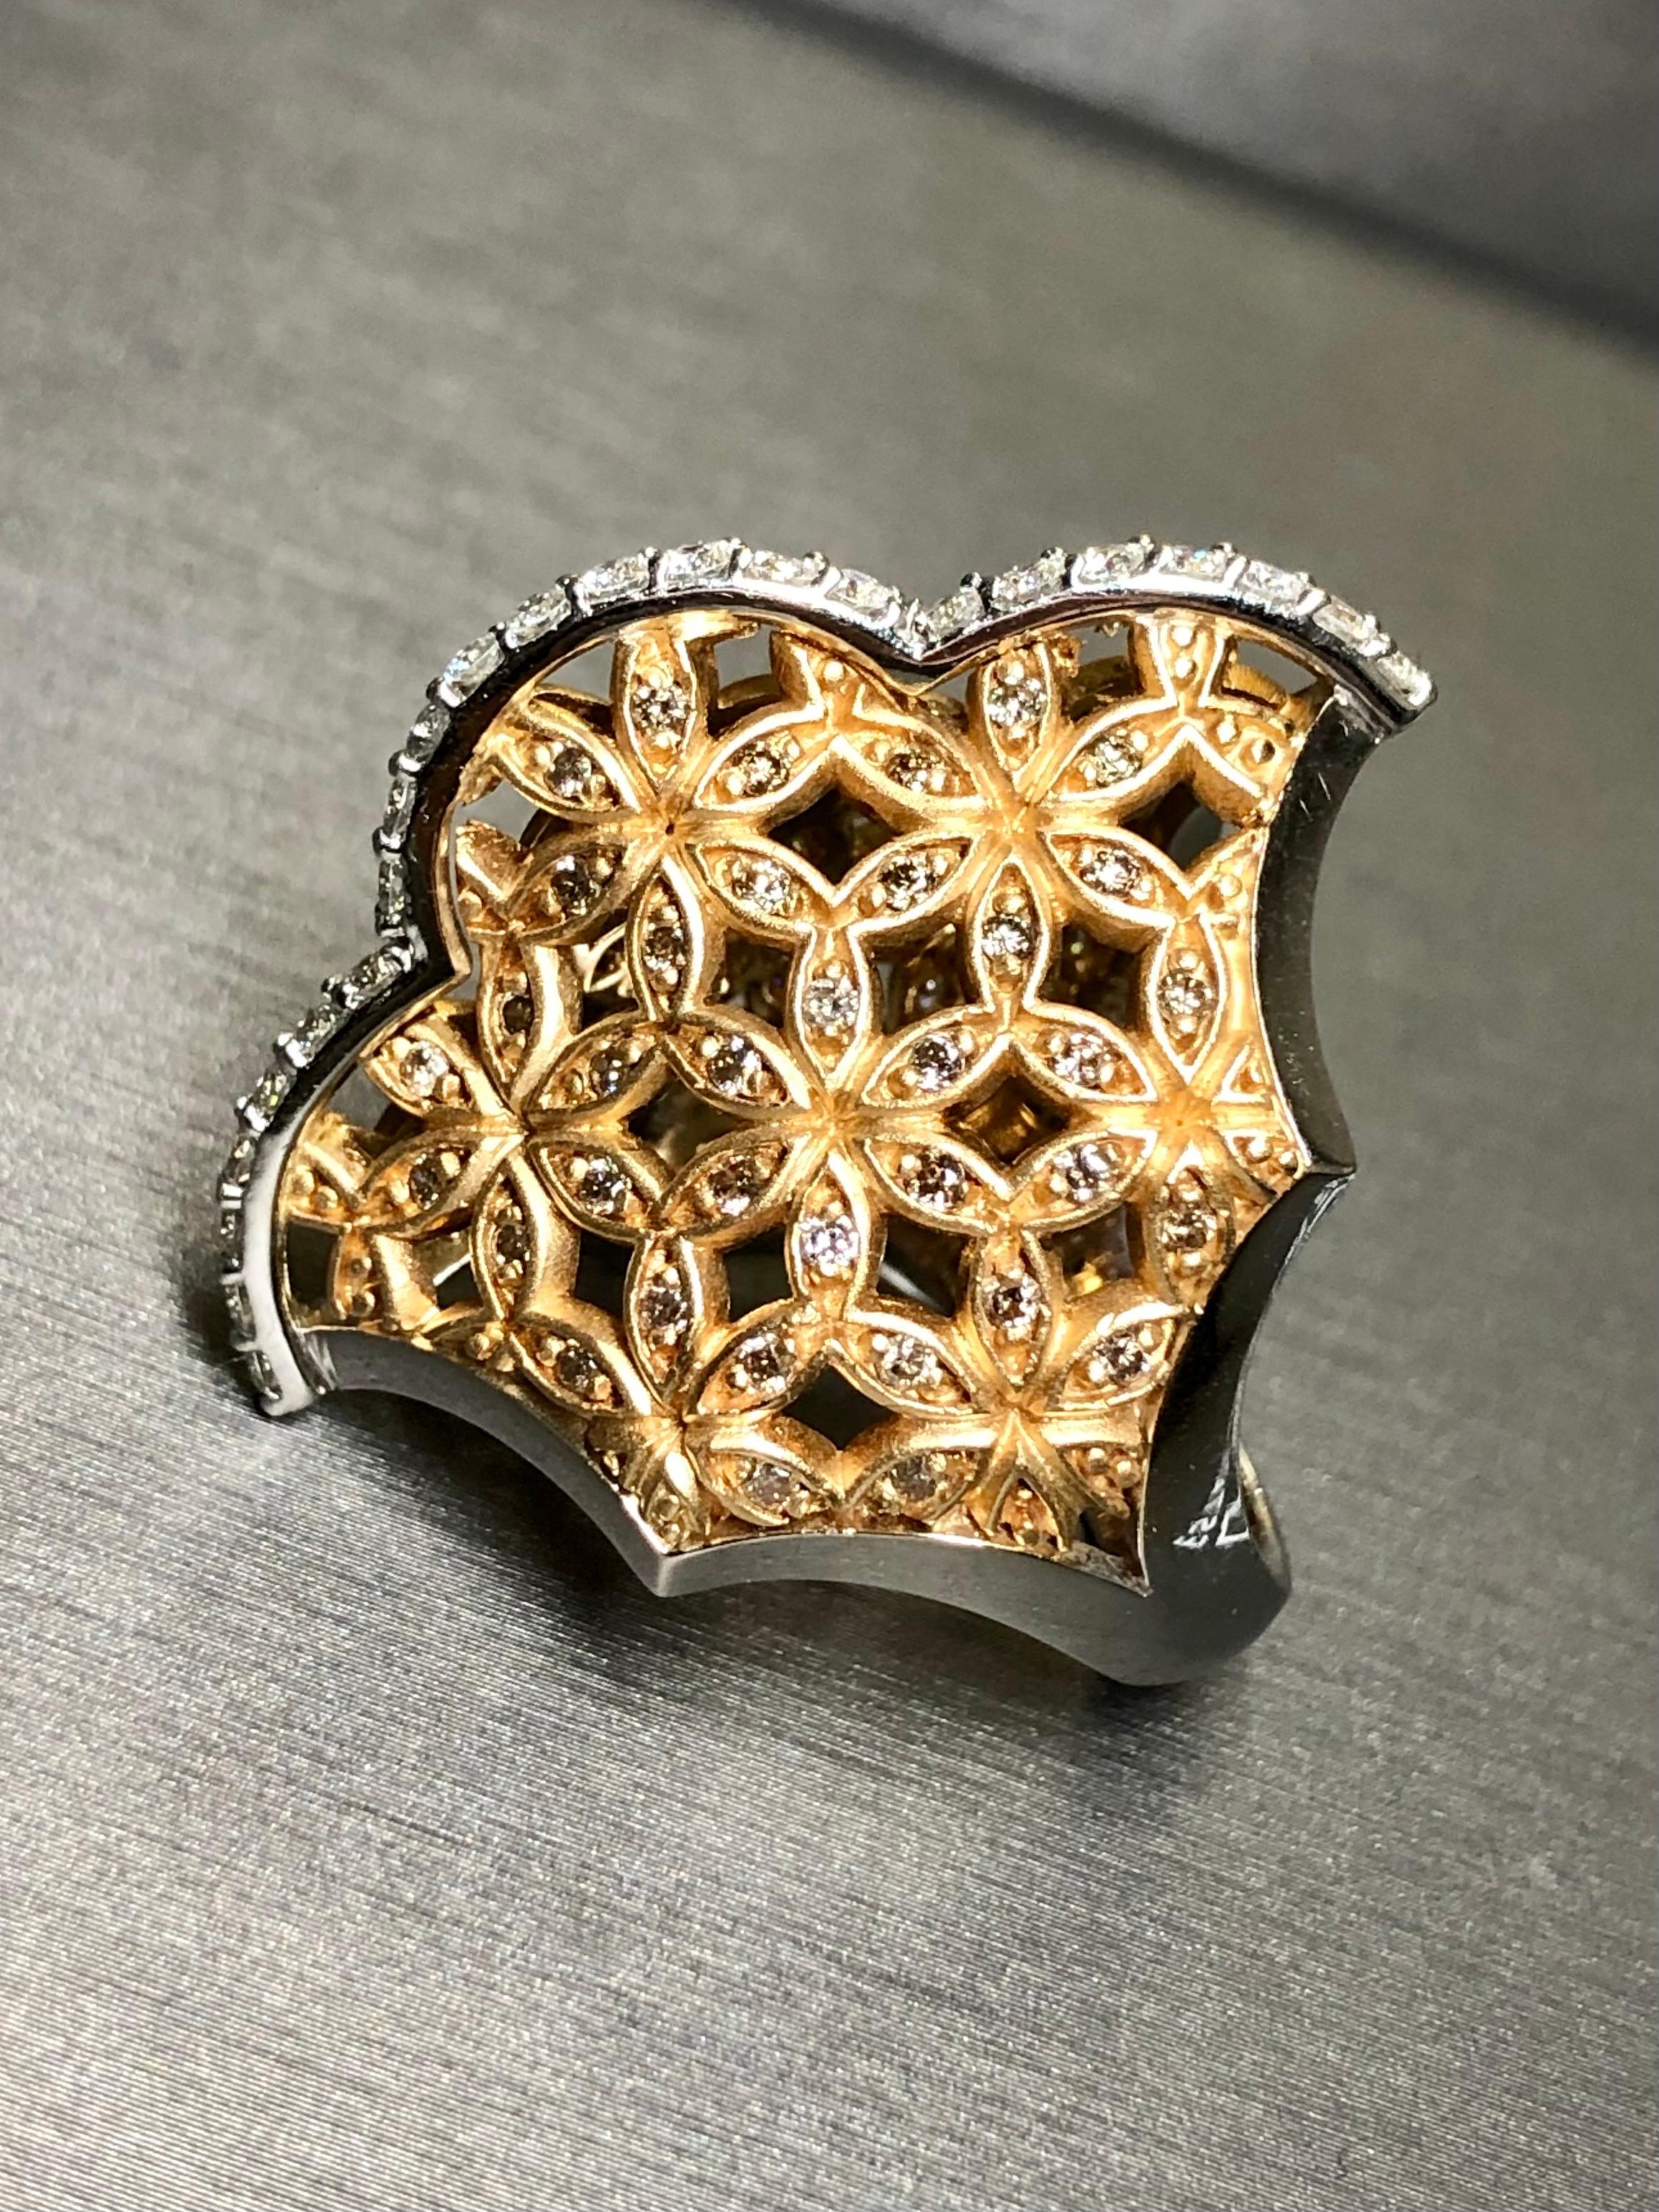 18K ARMAGGAN White Rose Gold Diamond Floral Open Work Cocktail Ring Sz 7.5  In Good Condition For Sale In Winter Springs, FL